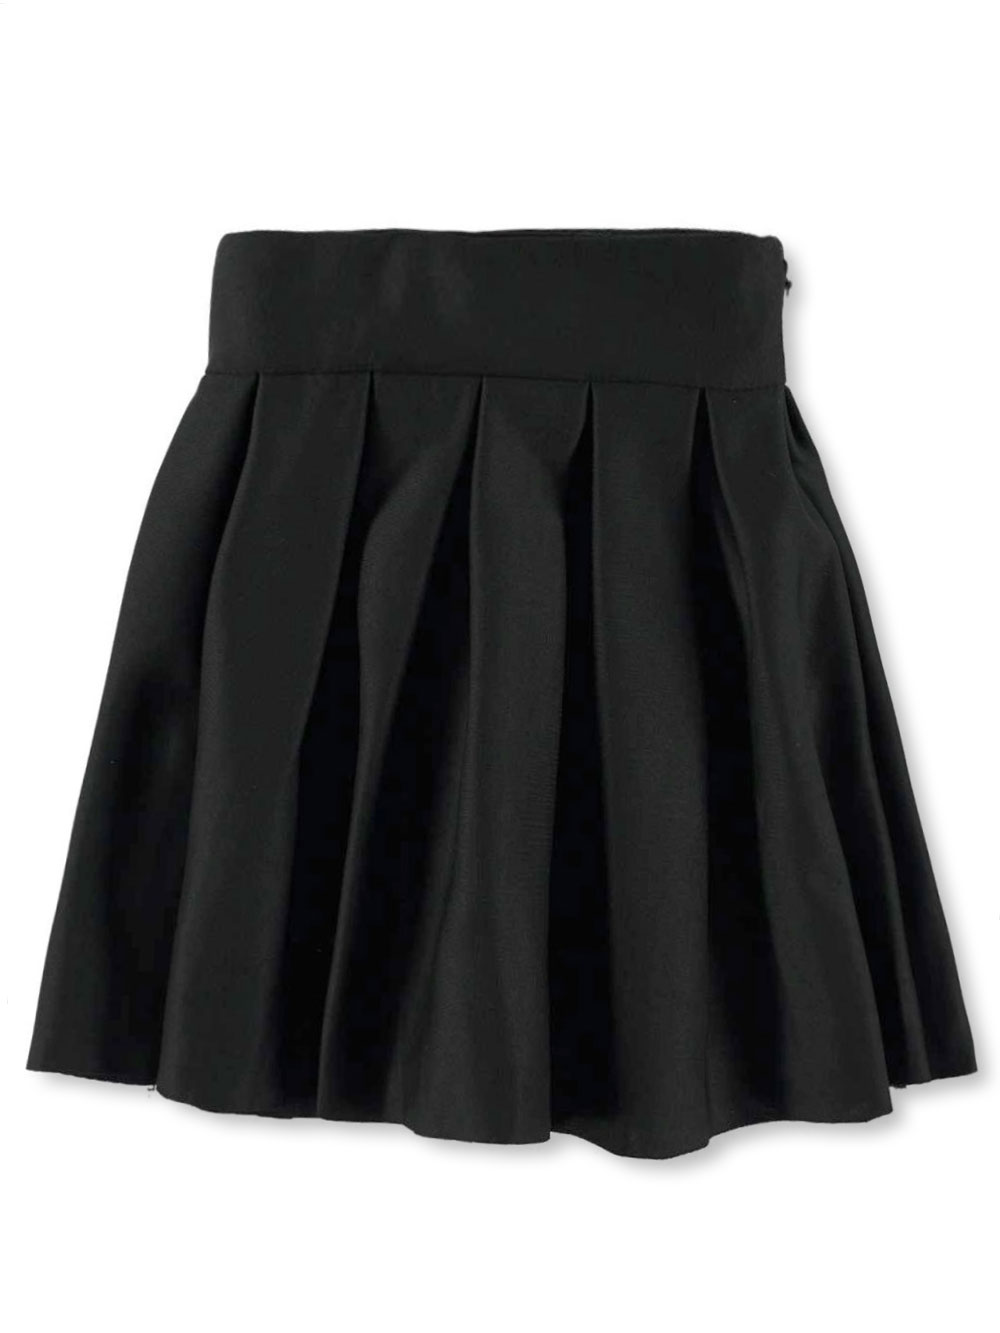 Size 4 Skirts for Girls